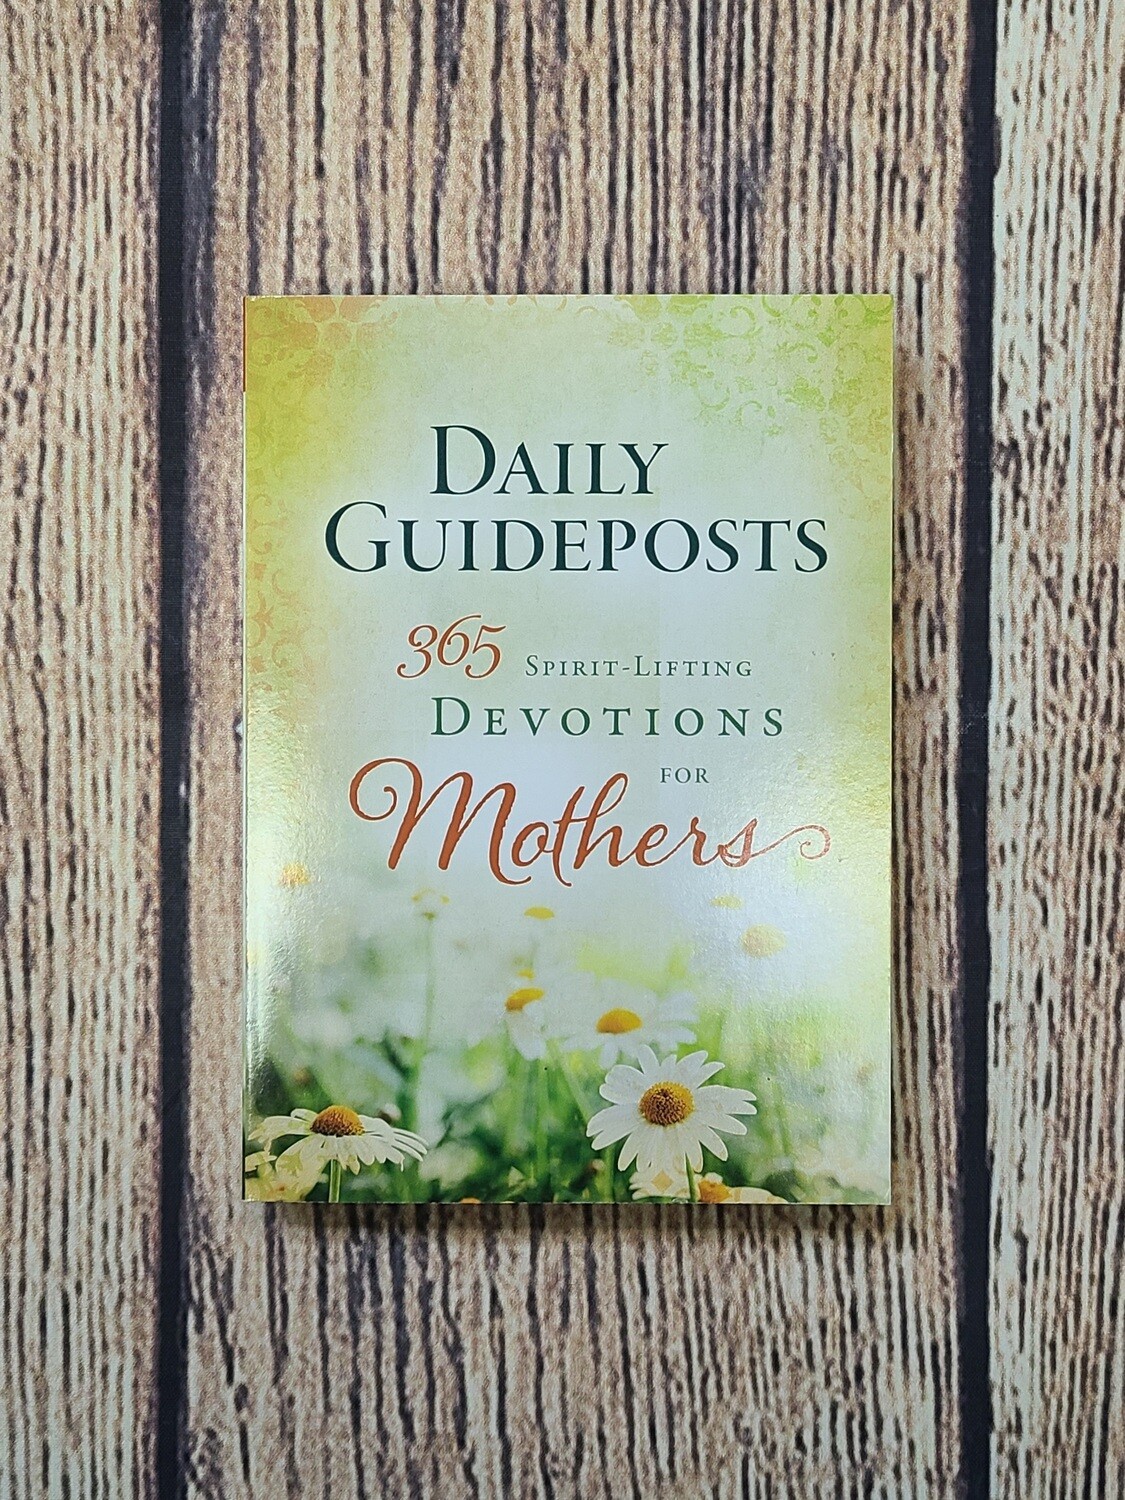 Daily Guideposts: 365 Spirit-Lifting Devotions for Mothers by Guideposts